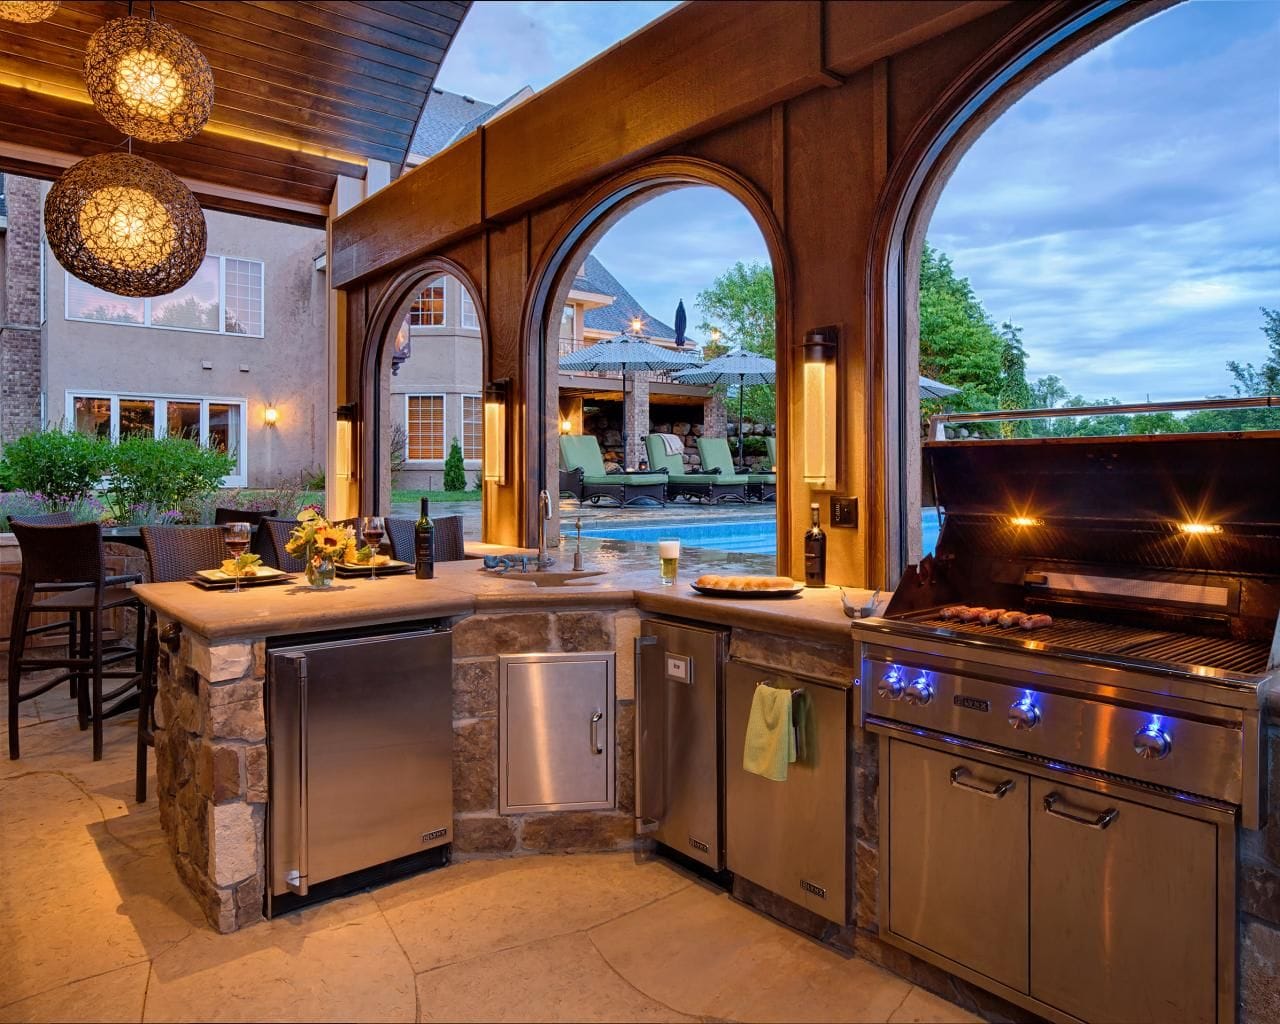 20 Inspirational Design Ideas for Your Outdoor Kitchen